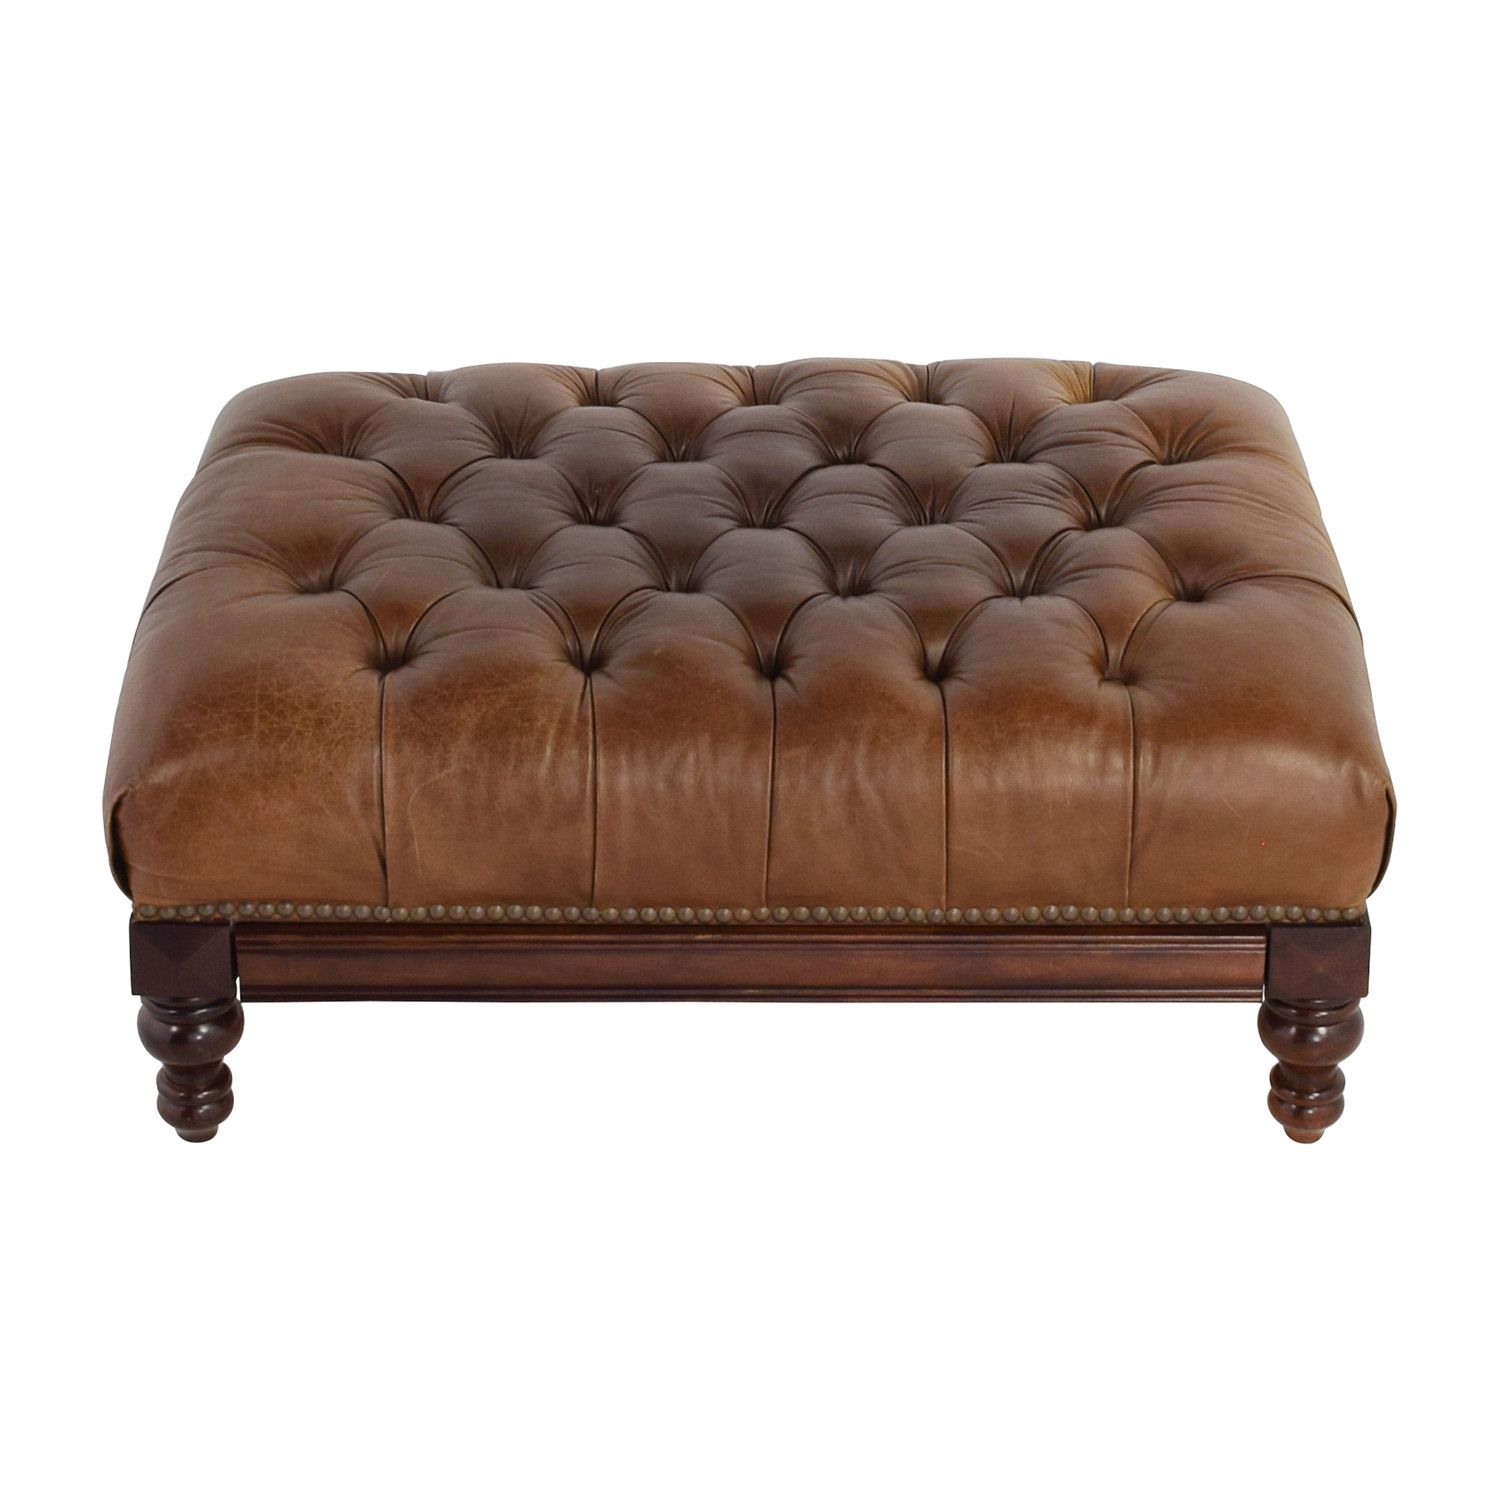 77% Off – Antique Tufted Leather Ottoman With Secret Storage / Storage Intended For Tufted Ottomans (View 17 of 20)